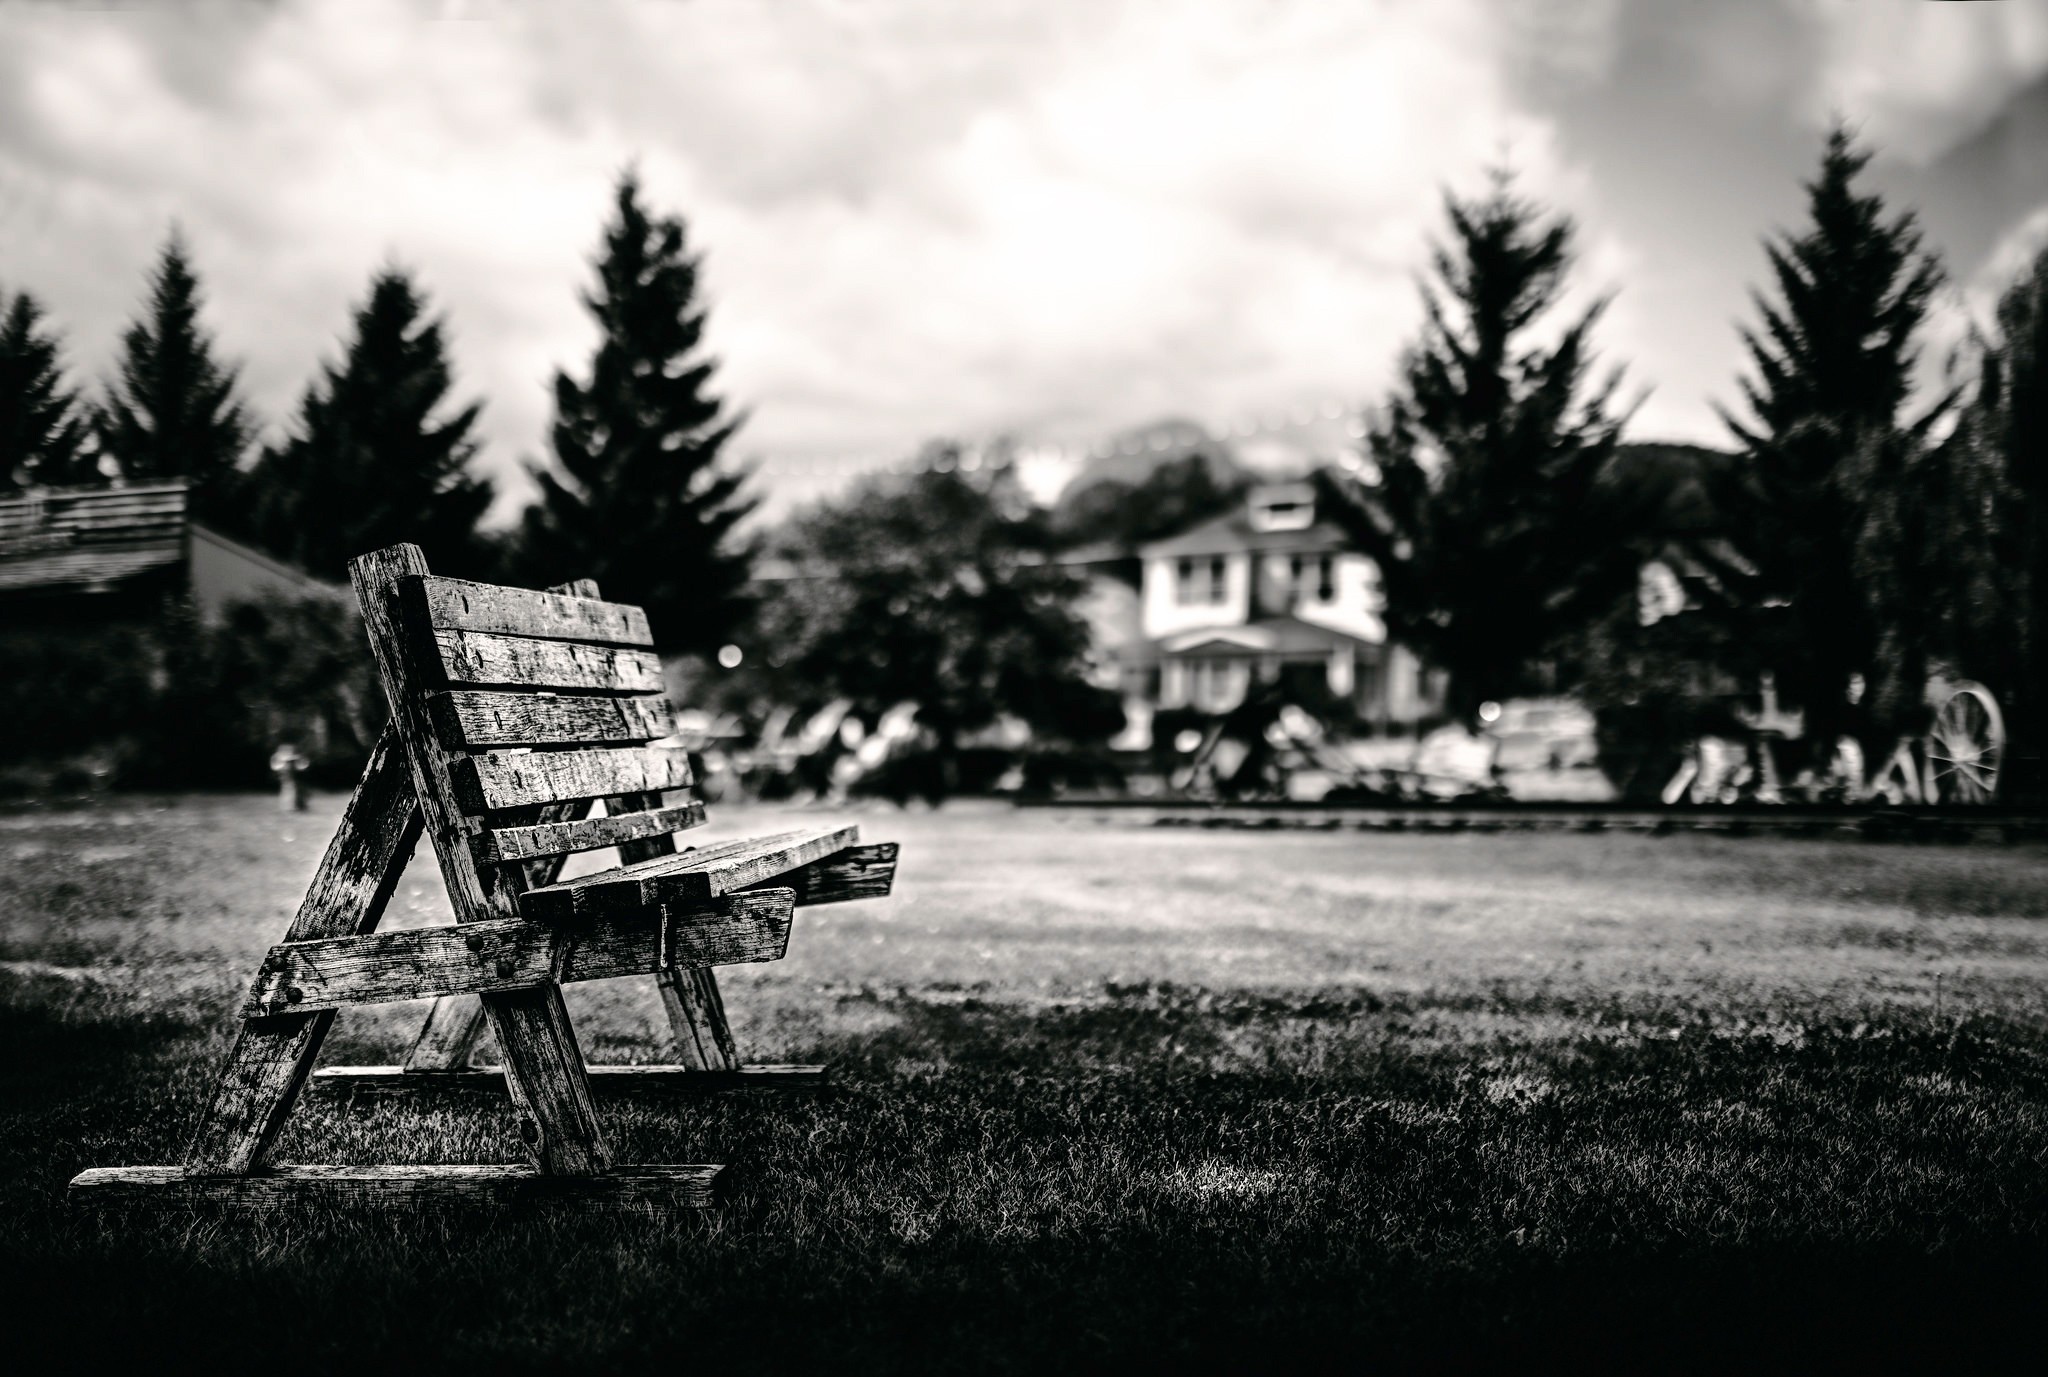 General 2048x1377 bench monochrome house outdoors